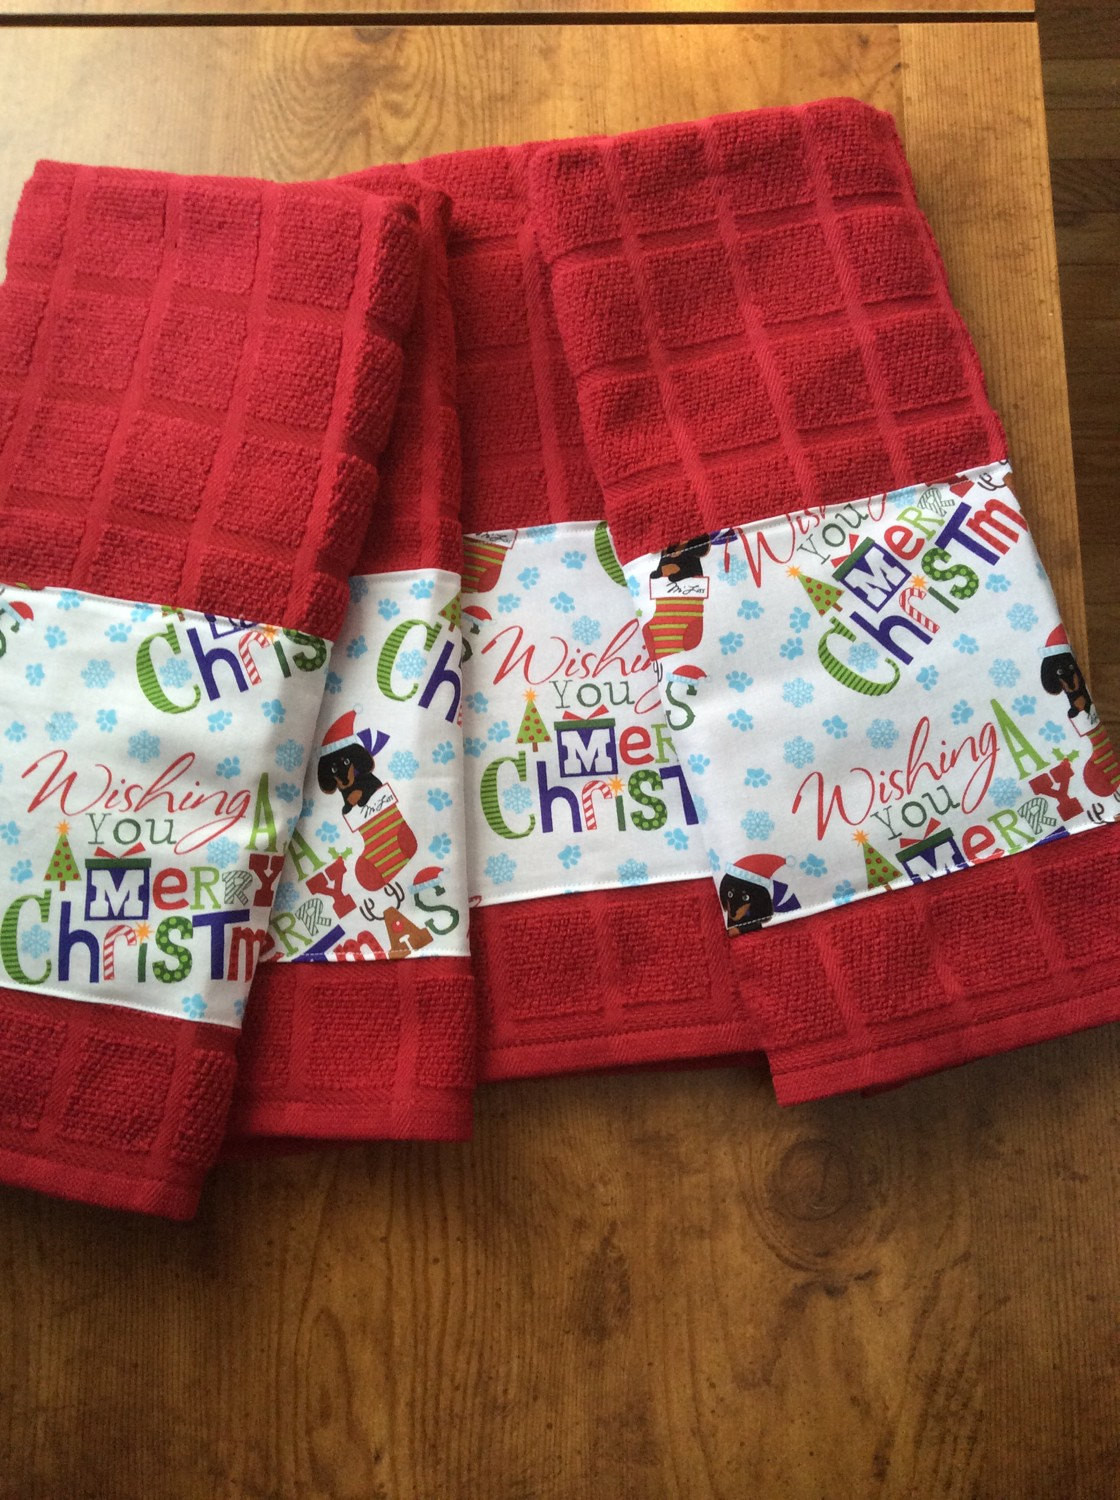 Christmas Kitchen Towels
 Dachshunds and Christmas themed kitchen towels